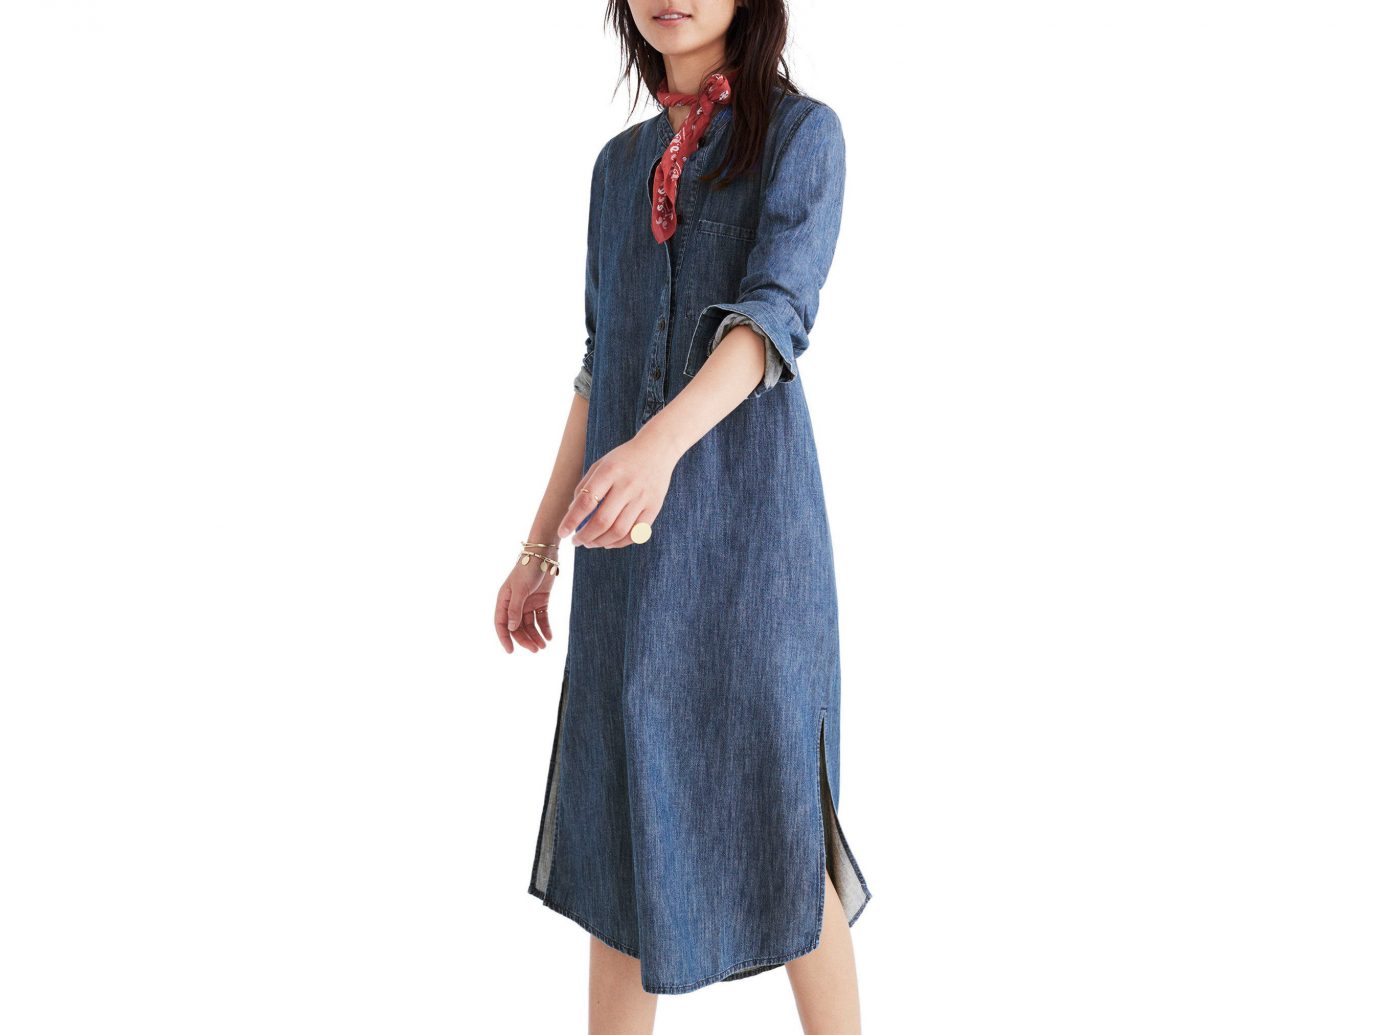 Style + Design clothing person denim jeans day dress wearing dress fashion model neck posing sleeve button